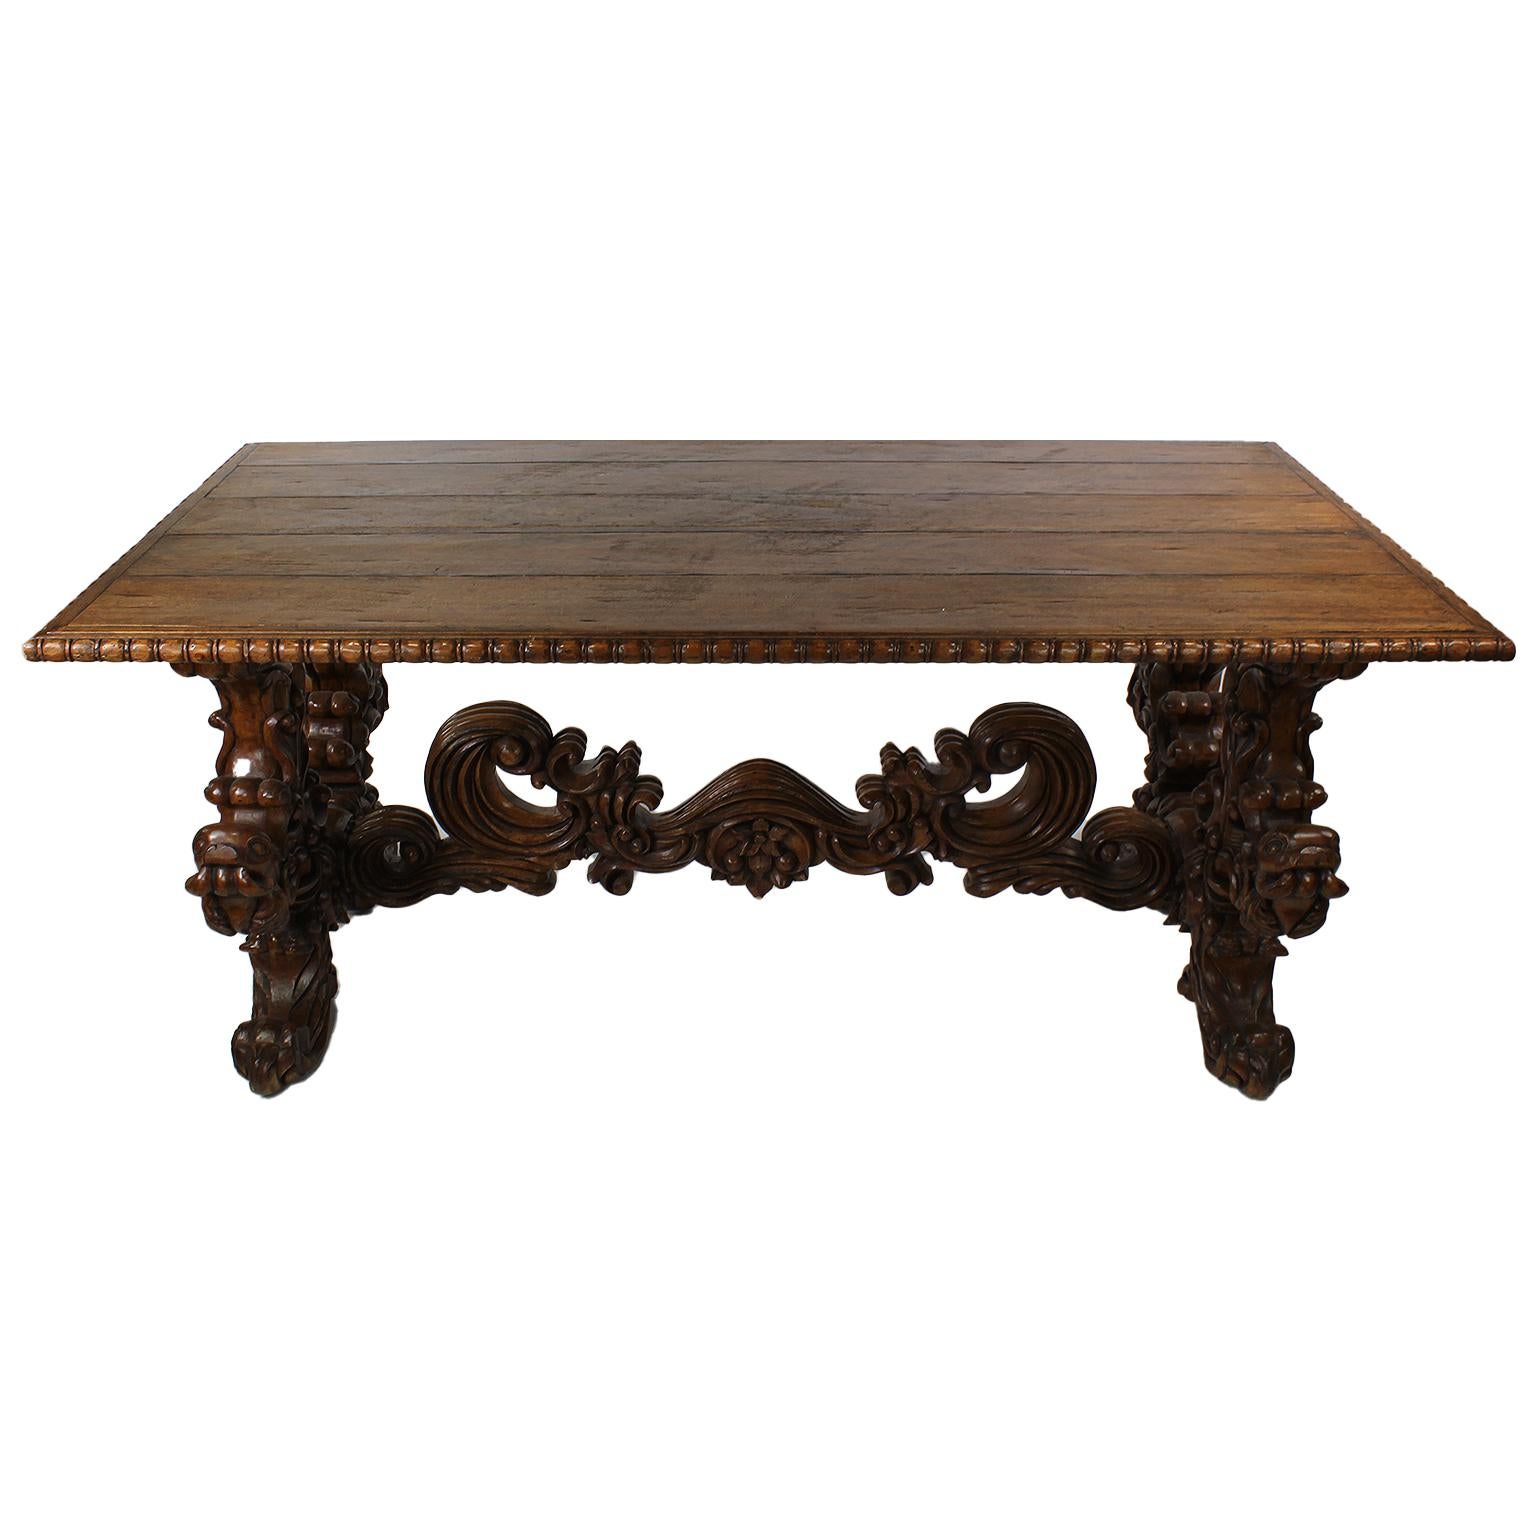 A large carved wood tavern or farm dining table in the Baroque Revival Style. The rectangular top with a carved border, raised on twin carved pedestal bases conjoined with a central stretch-bar, probably Italian, but origin unknown. A great table